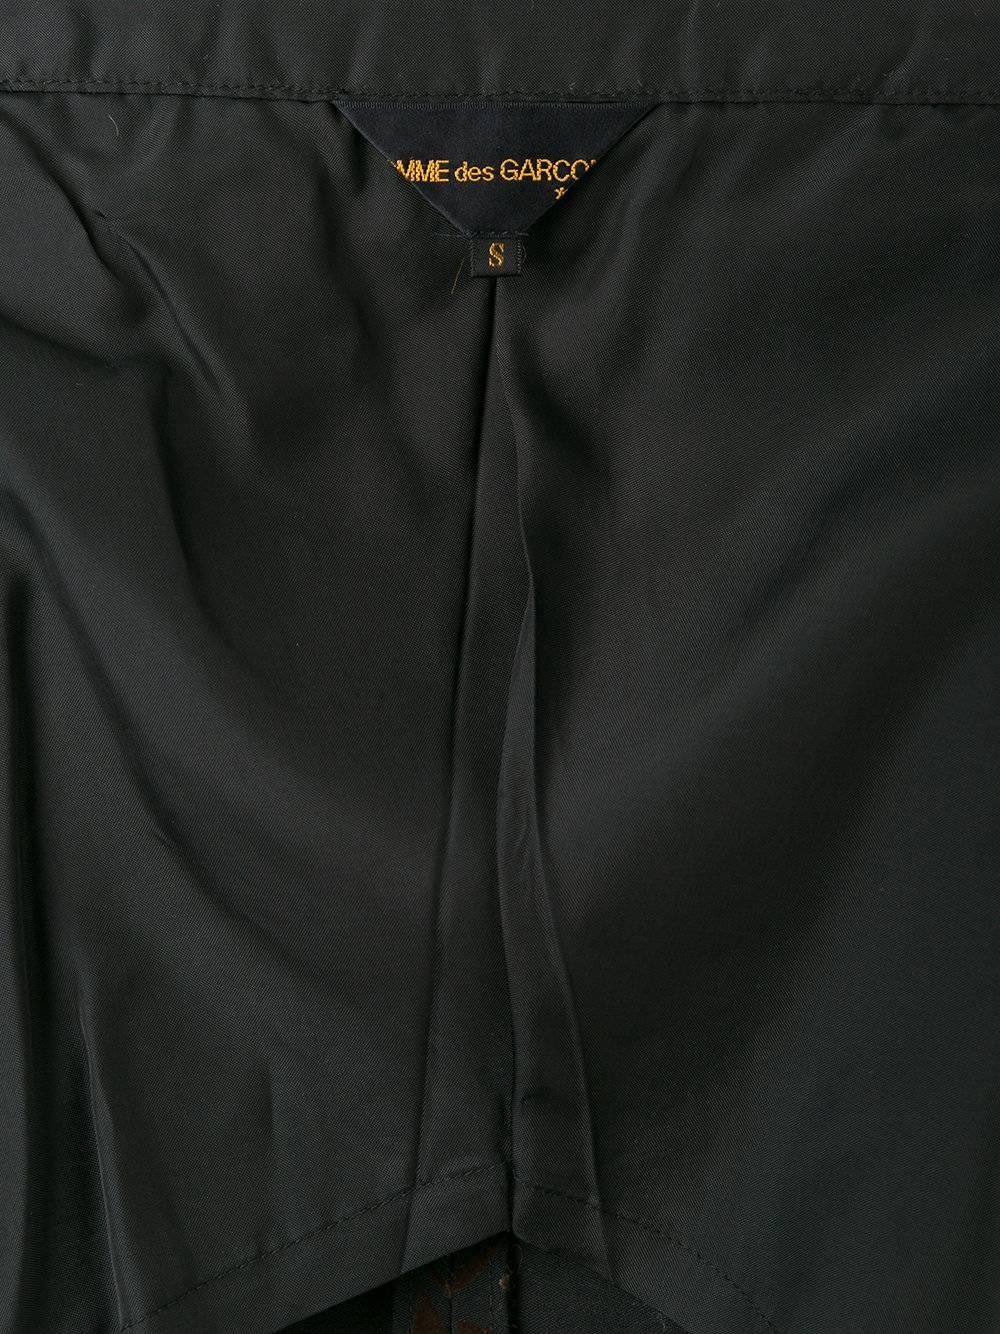 Fall 1996 Comme des Garçons flocked velvet top kimono  In Excellent Condition For Sale In London, GB